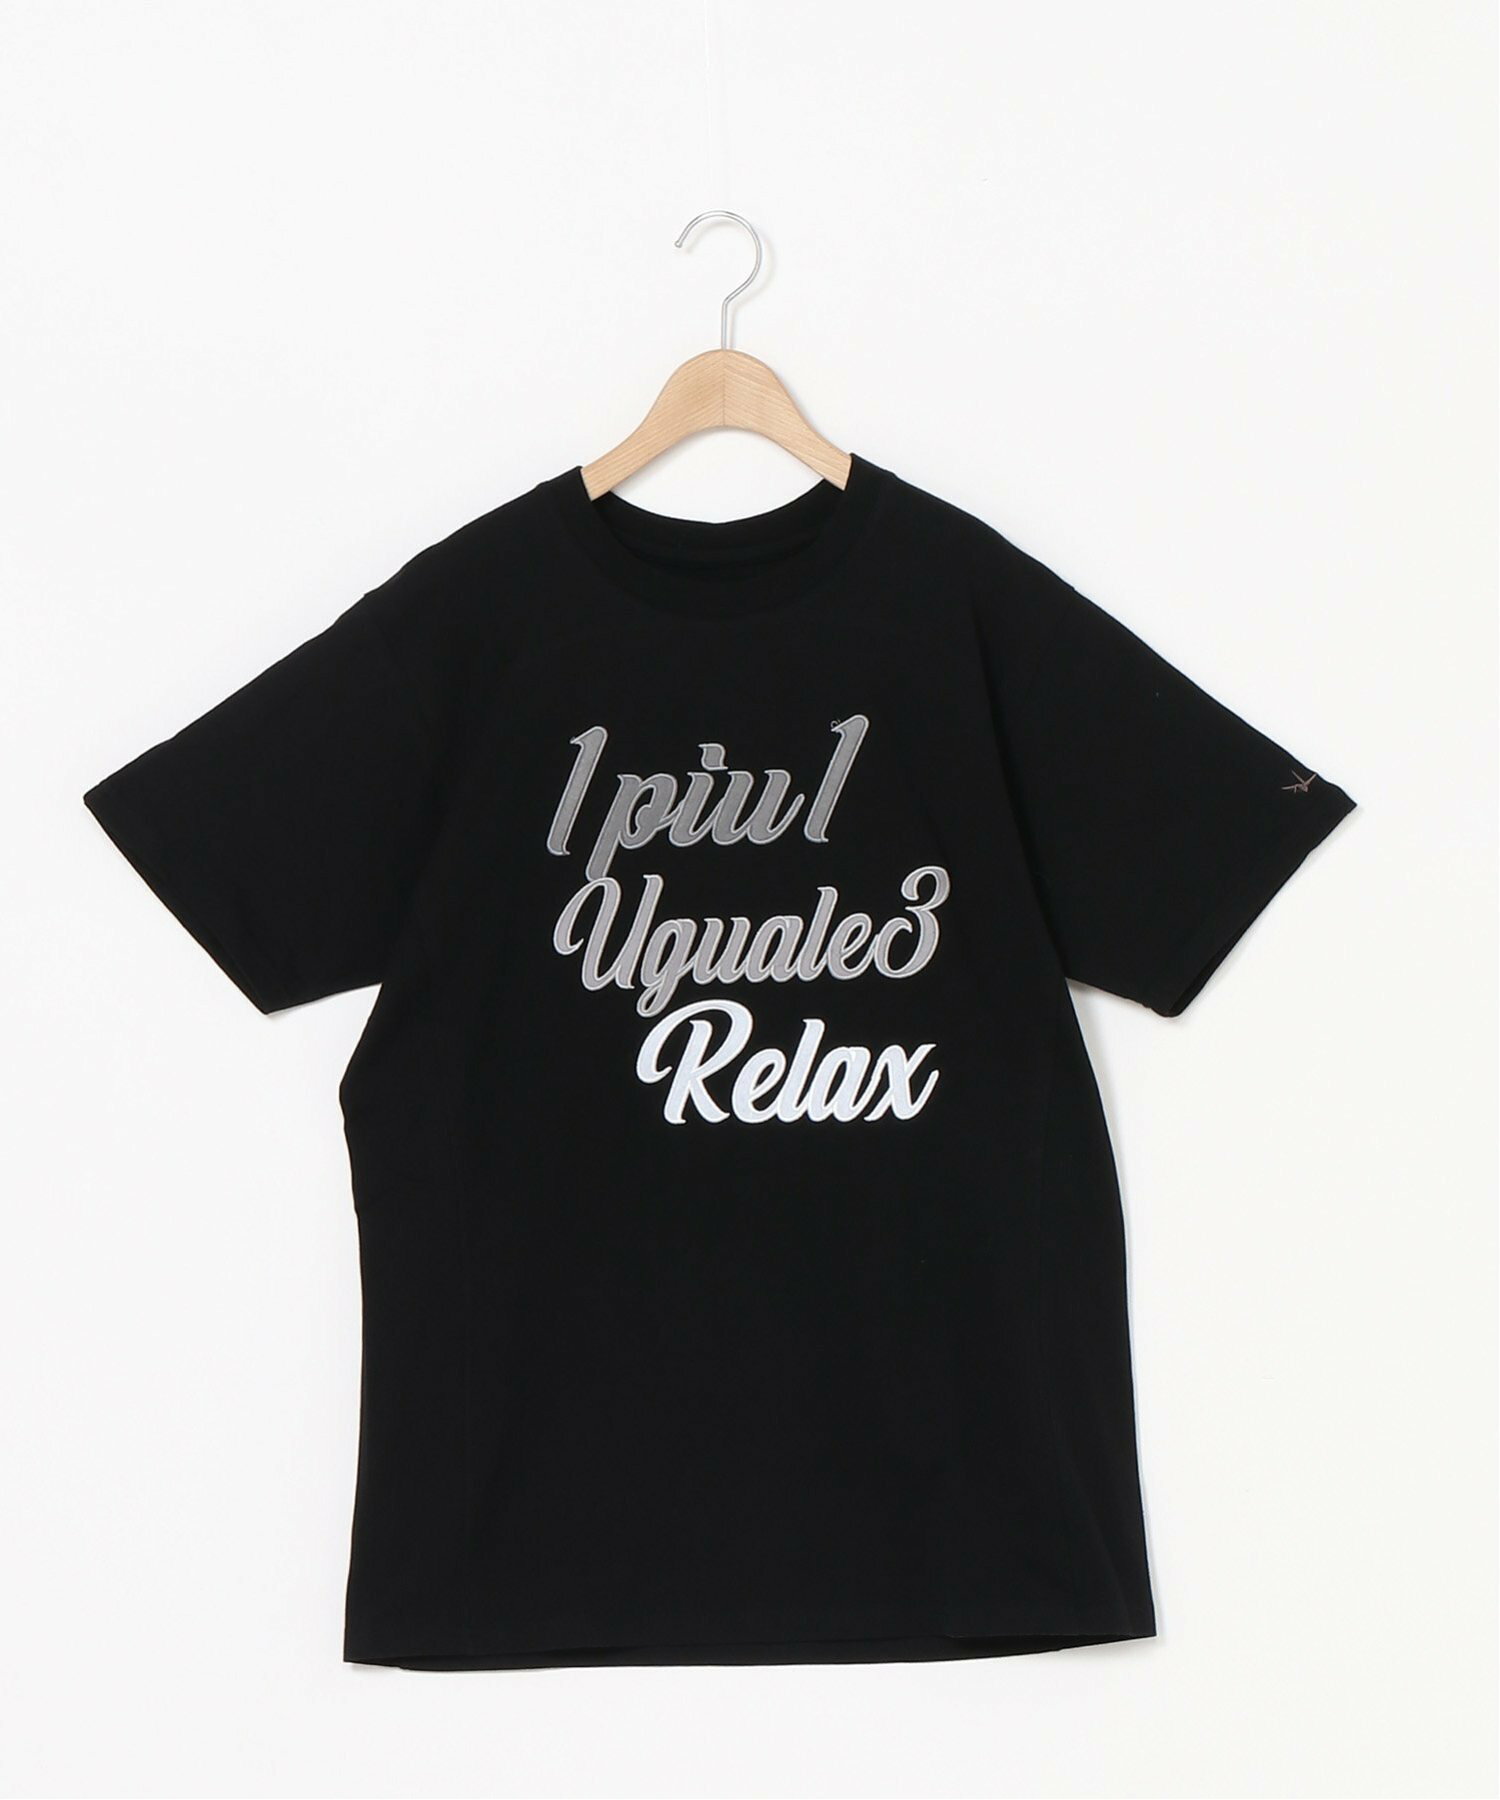 (M)1PIU1UGUALE3 RELAX/3 STEPS EMBROIDERY T-SHIRTS